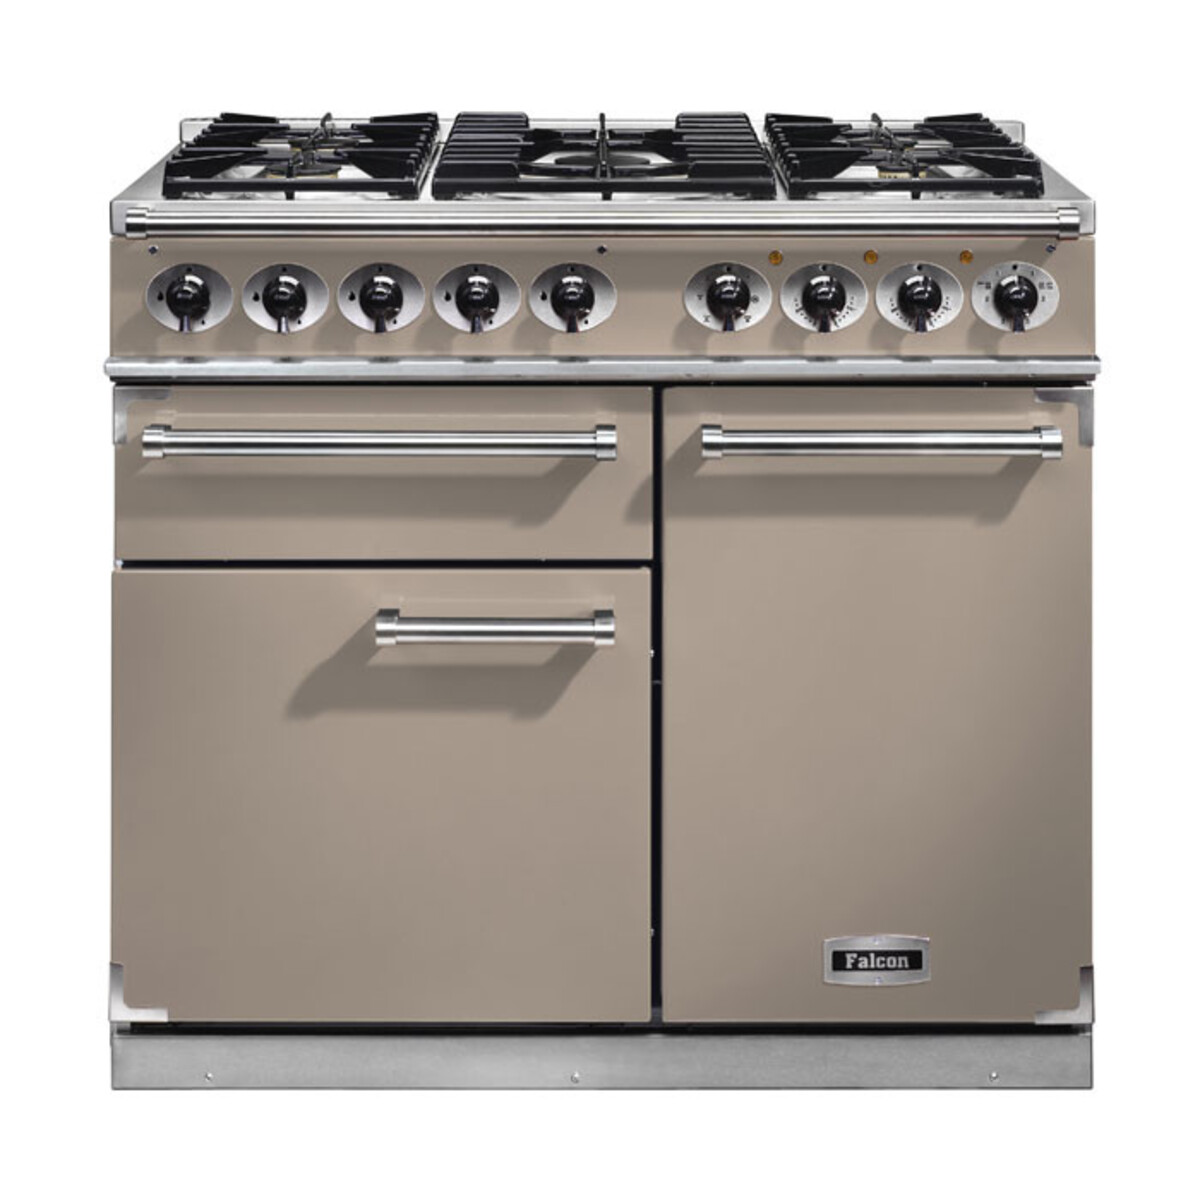 FALCON F1000DXDFFN/NM (115360) 1000 Deluxe Dual Fuel Range Cooker in Fawn/Nickel Trim